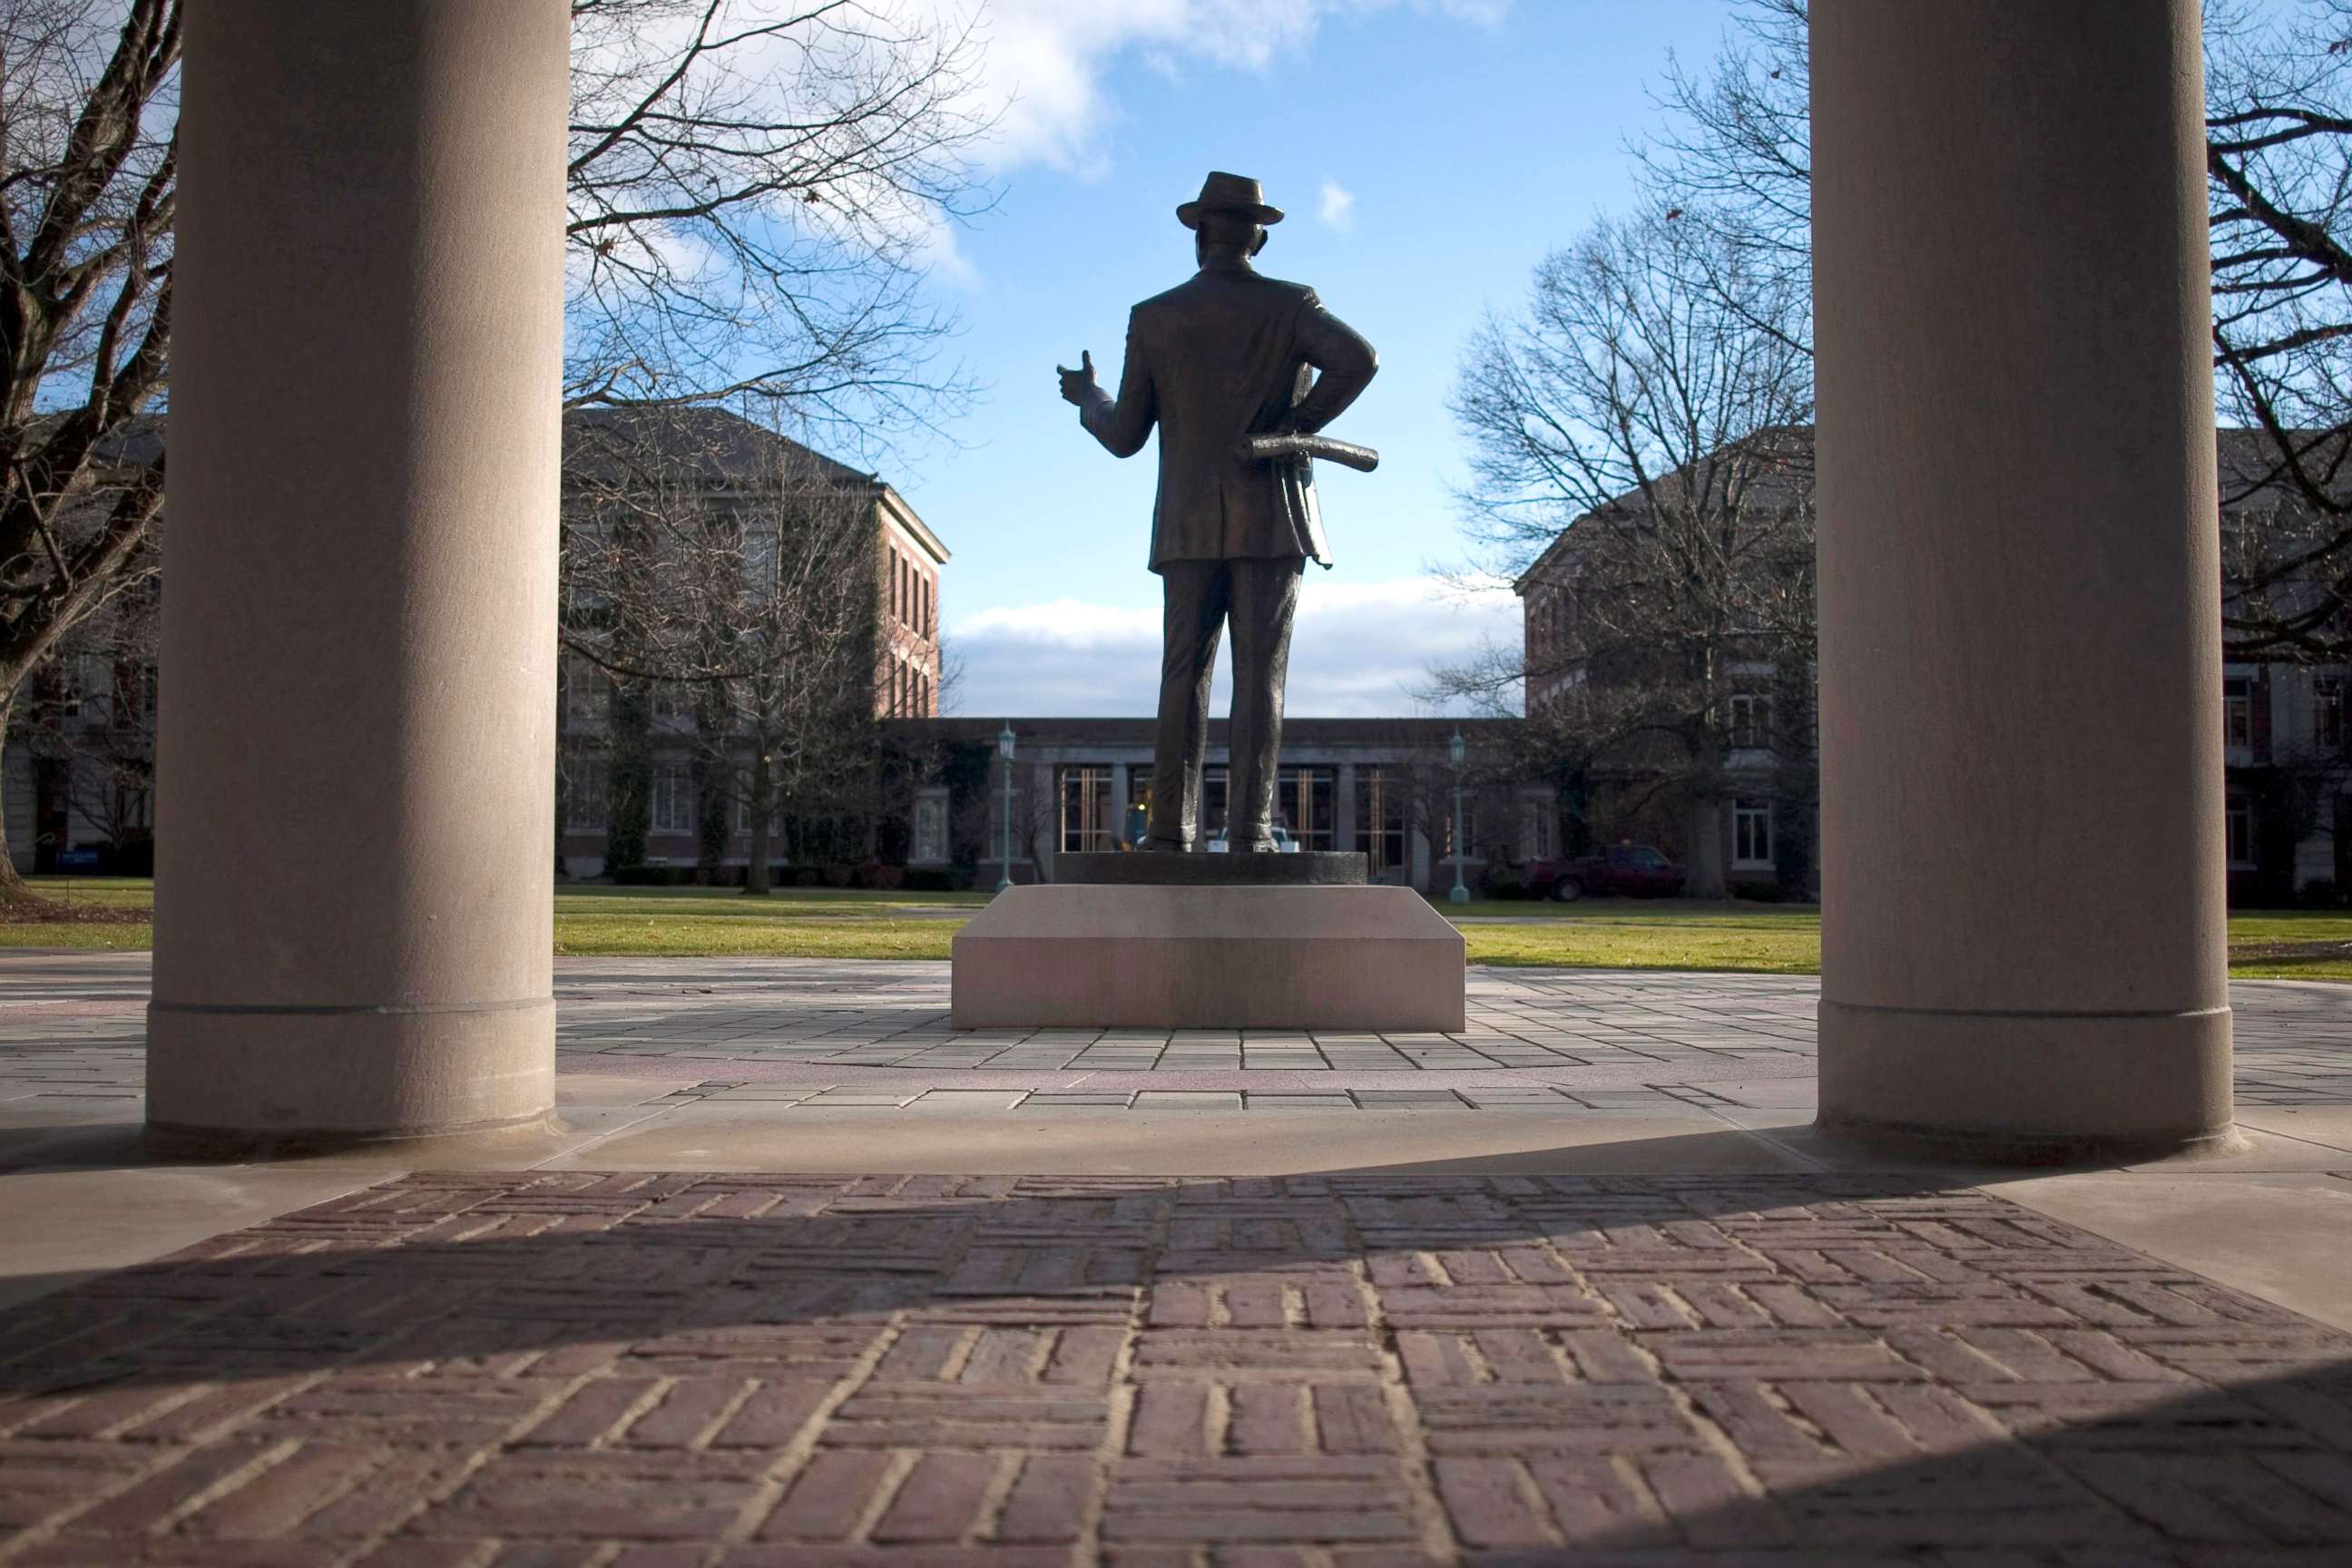 PHOTO: In this file photo, a statue of Eastman Kodak founder George Eastman stands on the University of Rochester campus in Rochester, N.Y., Dec. 23, 2011.